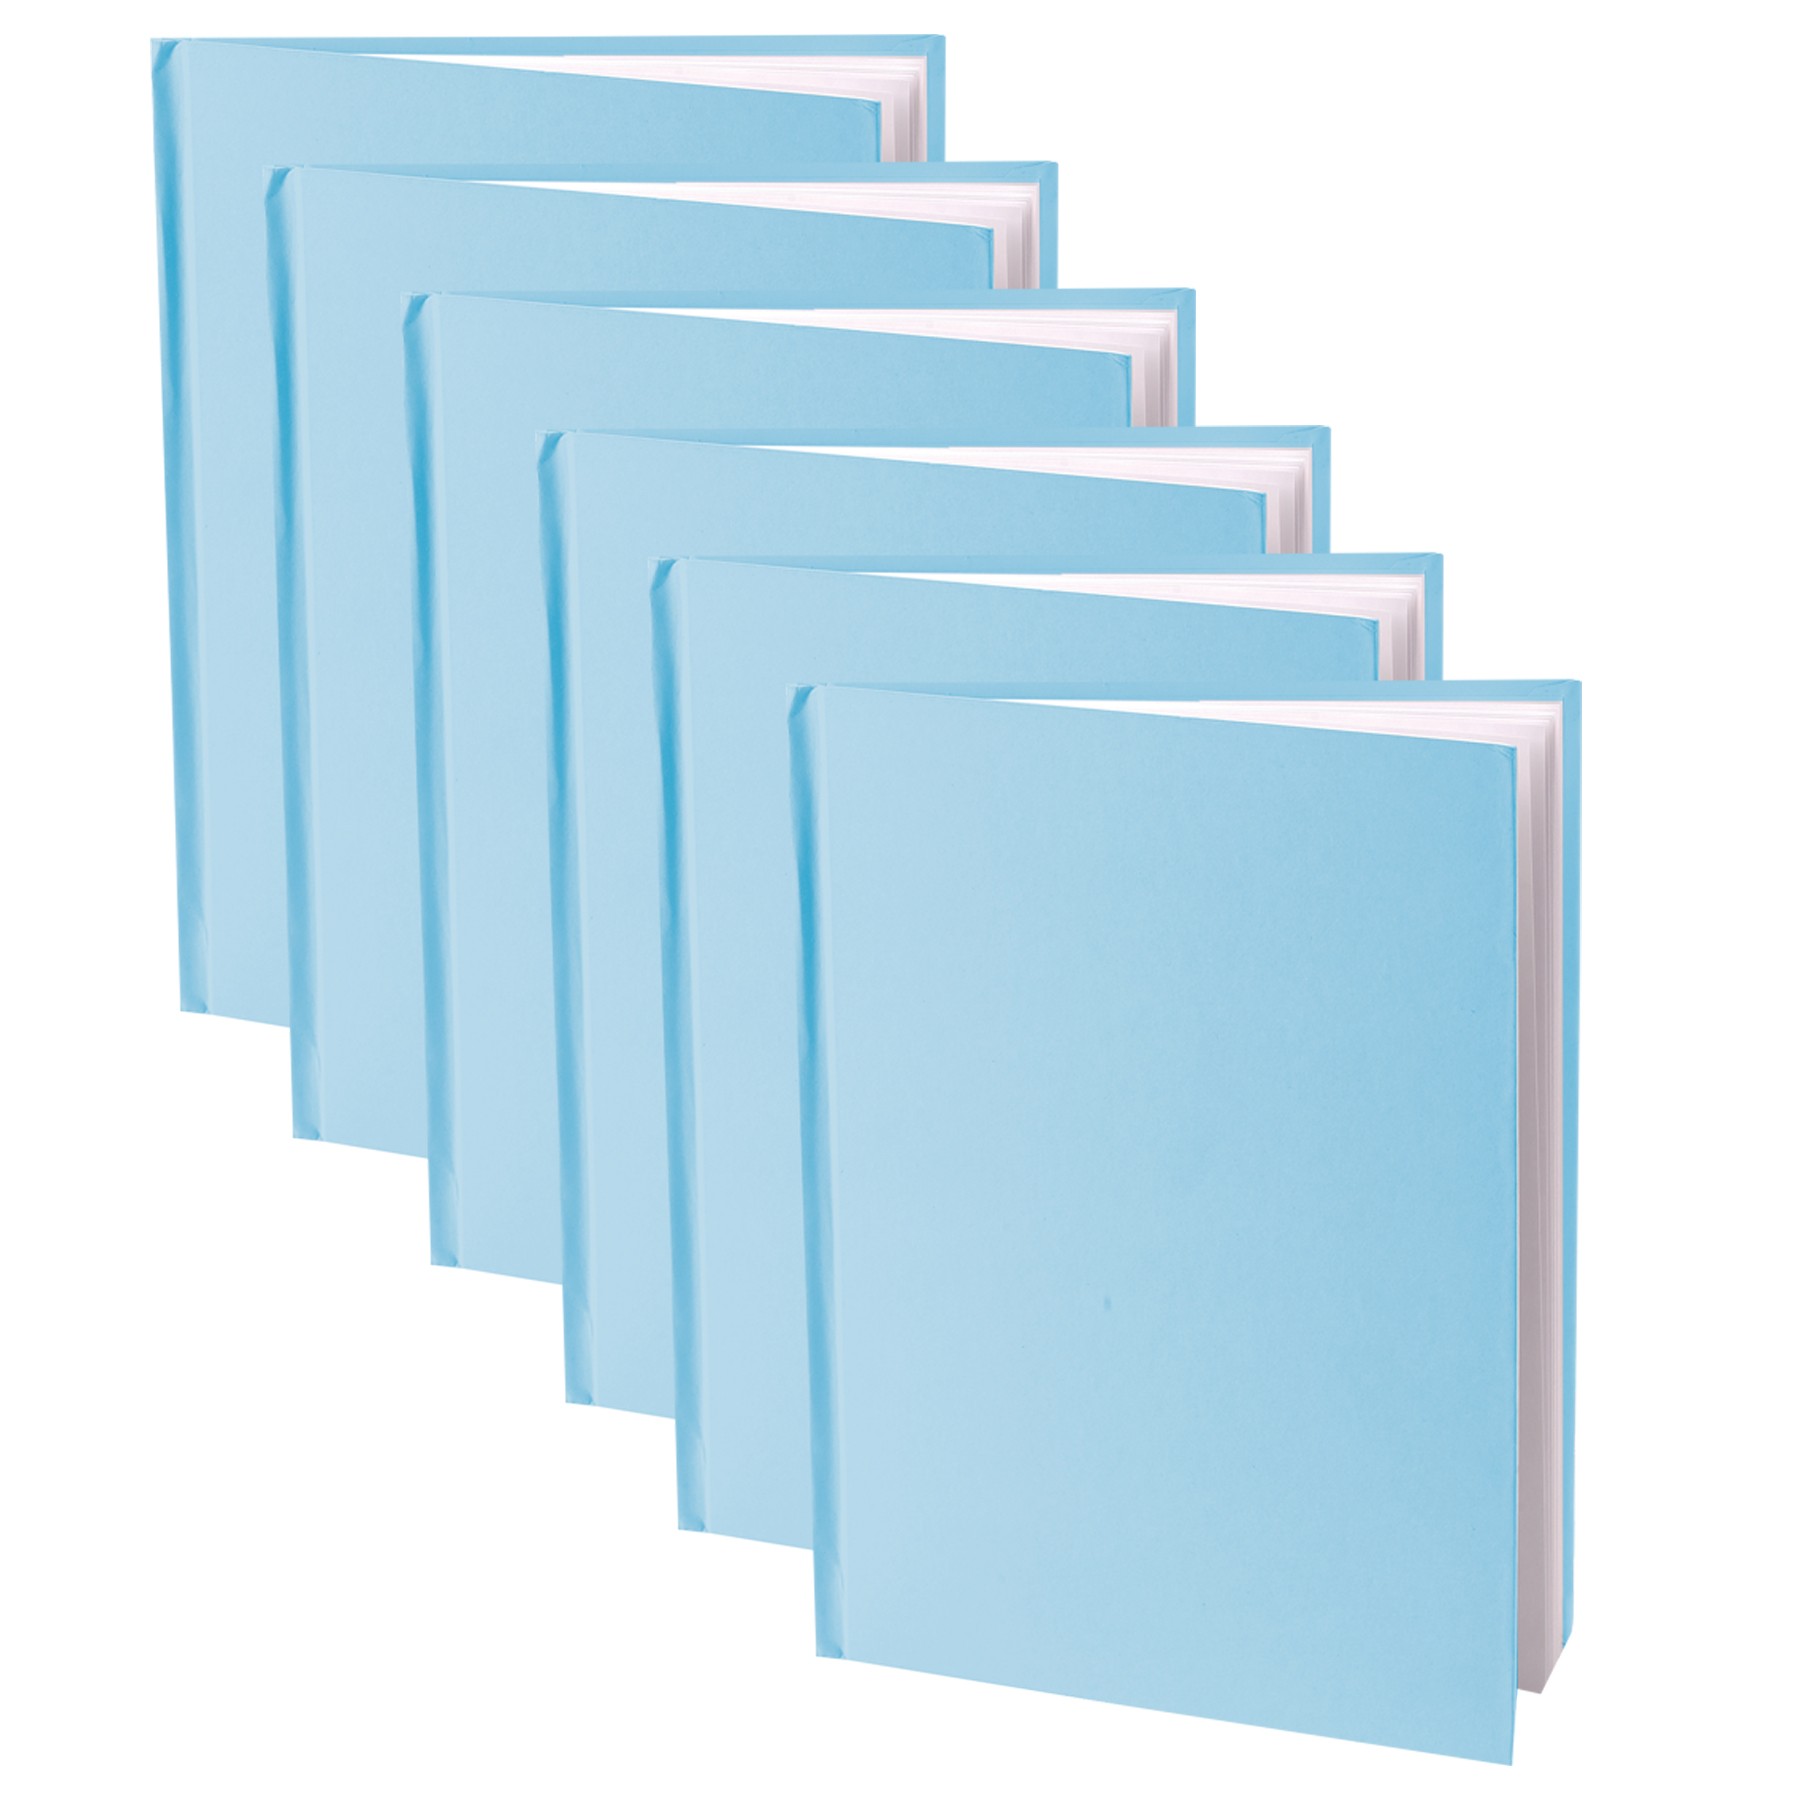 Young Authors Blue Hardcover Blank Book, White Pages, 11"H x 8-1/2"W Portrait, 14 Sheets/28 Pages, Pack of 6